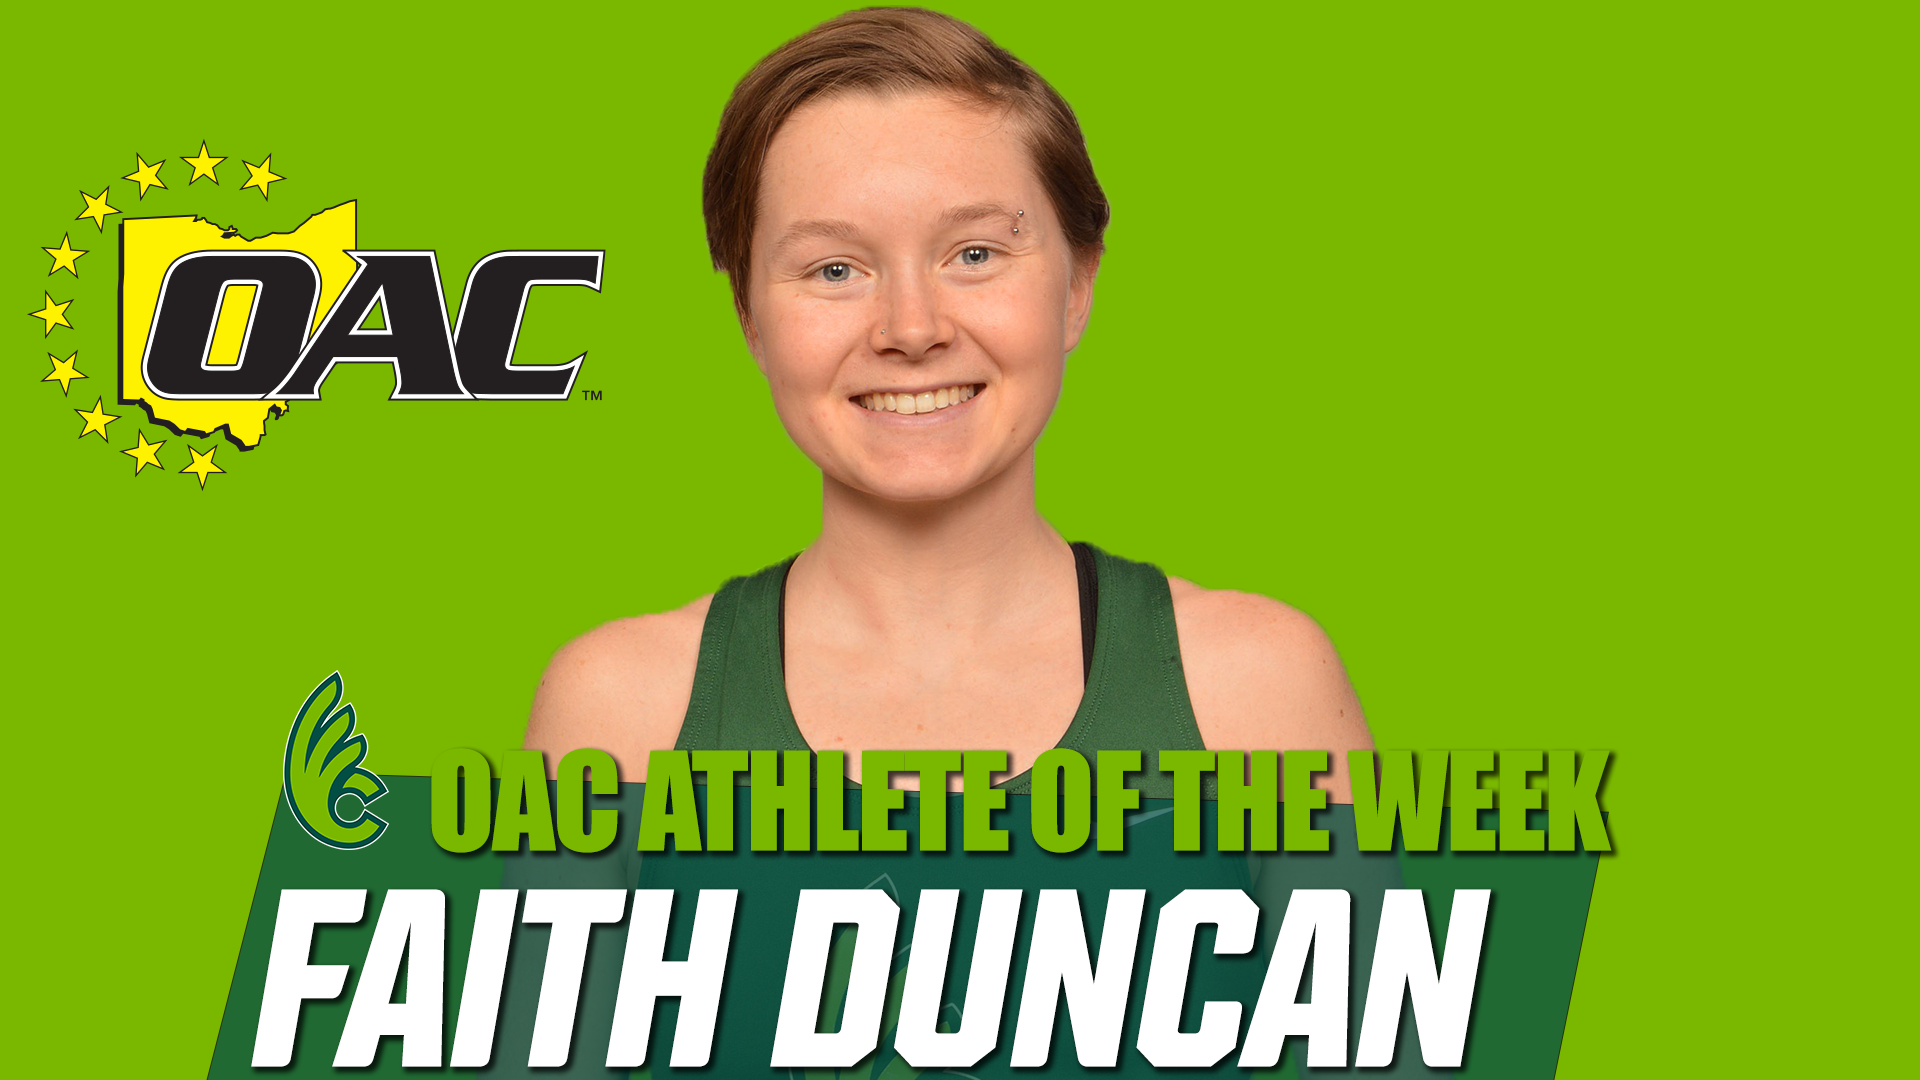 Top-10 National Time Earns Faith Duncan OAC Track Athlete of the Week